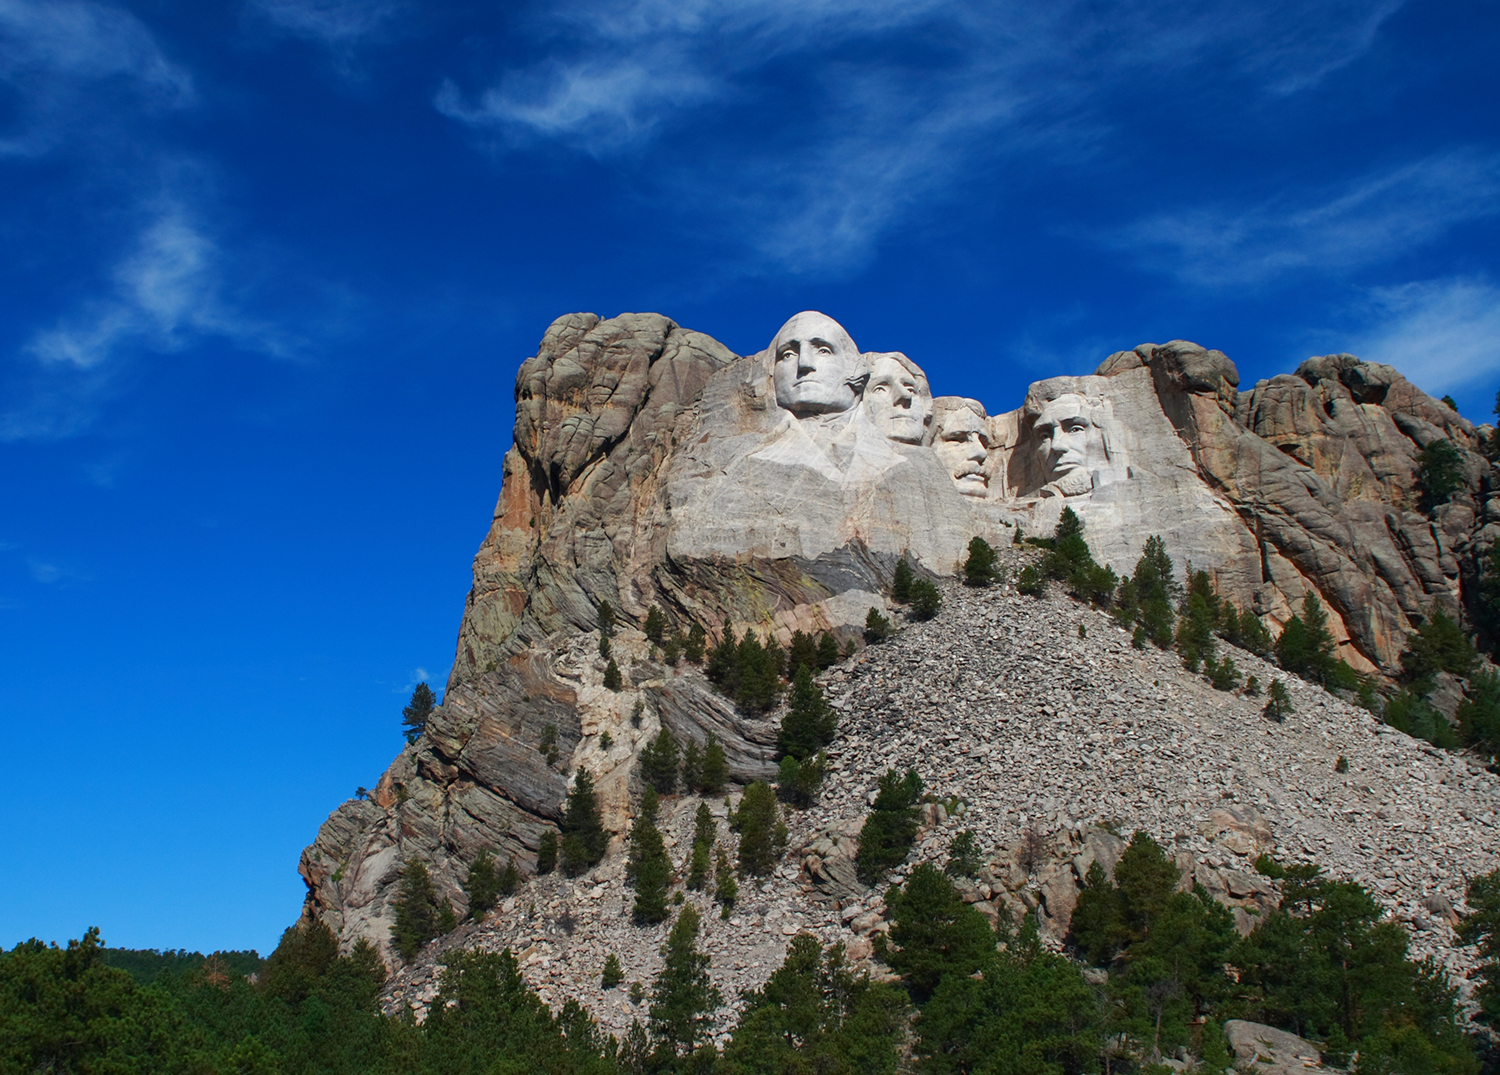 Four presidents' face carved into the face of a mountain.